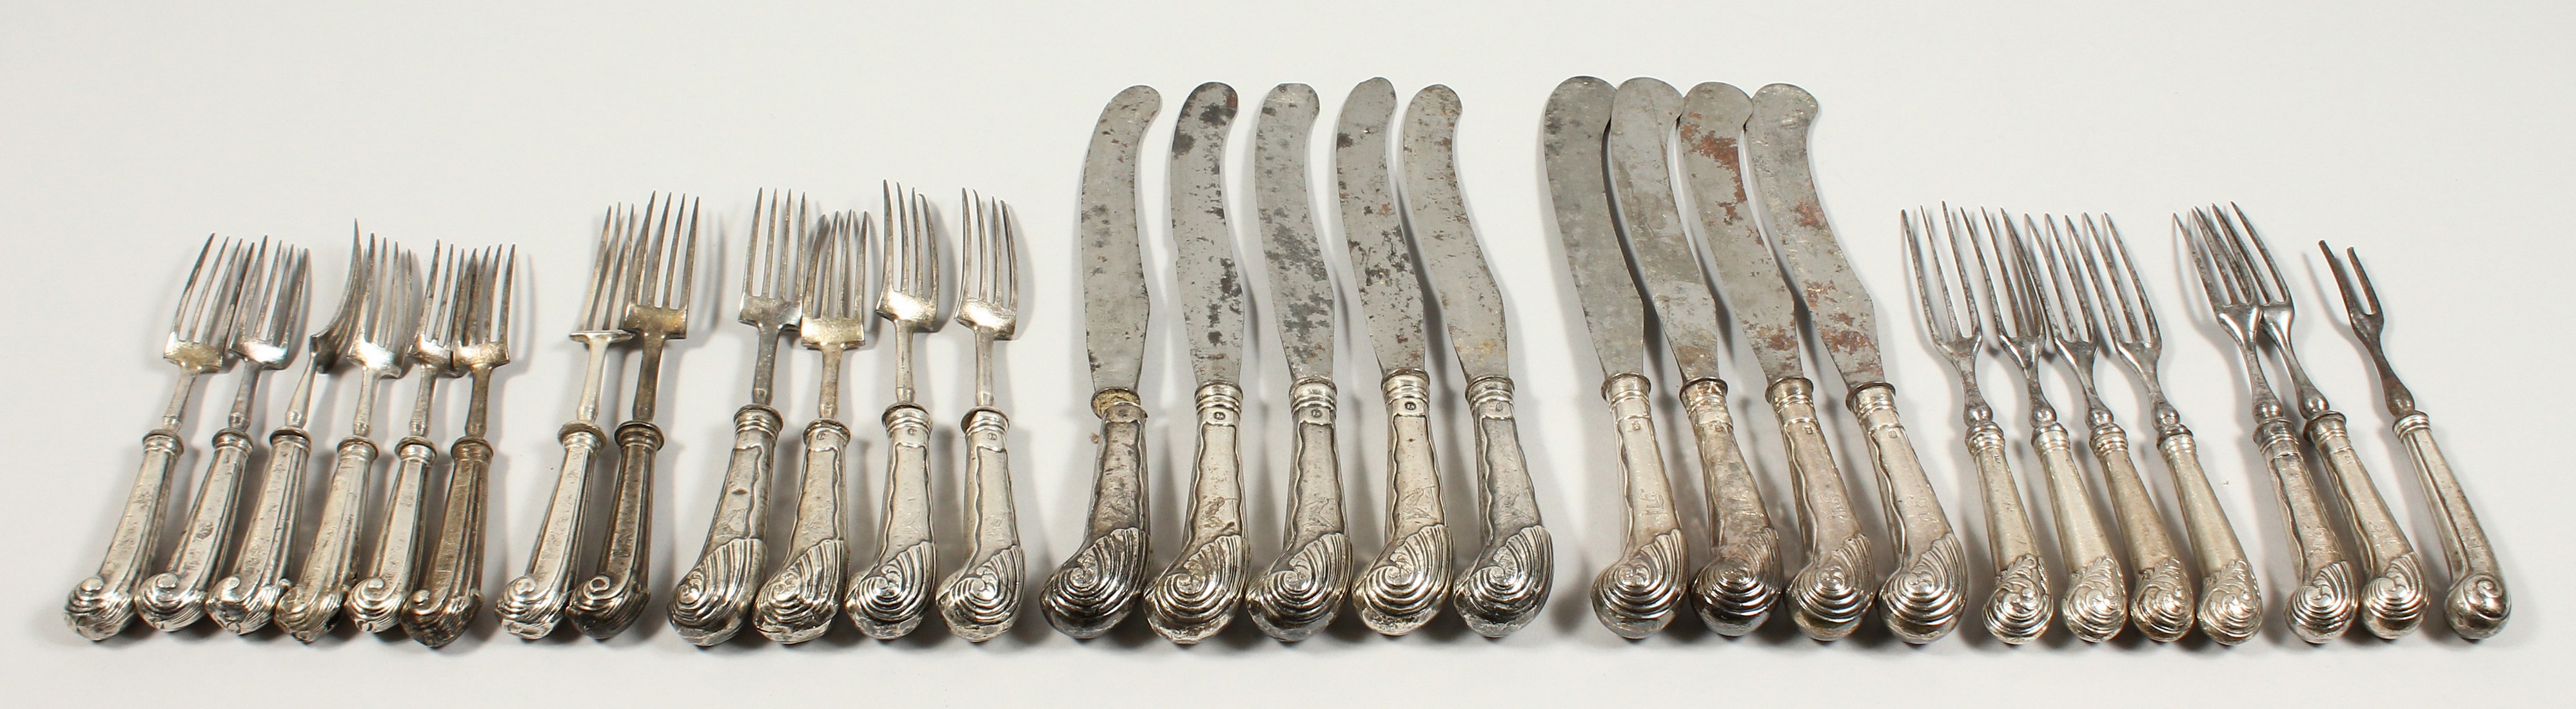 A GEORGIAN SILVER, PISTOL HANDLE, SET OF CUTLERY, comprising nine table knives, twelve table